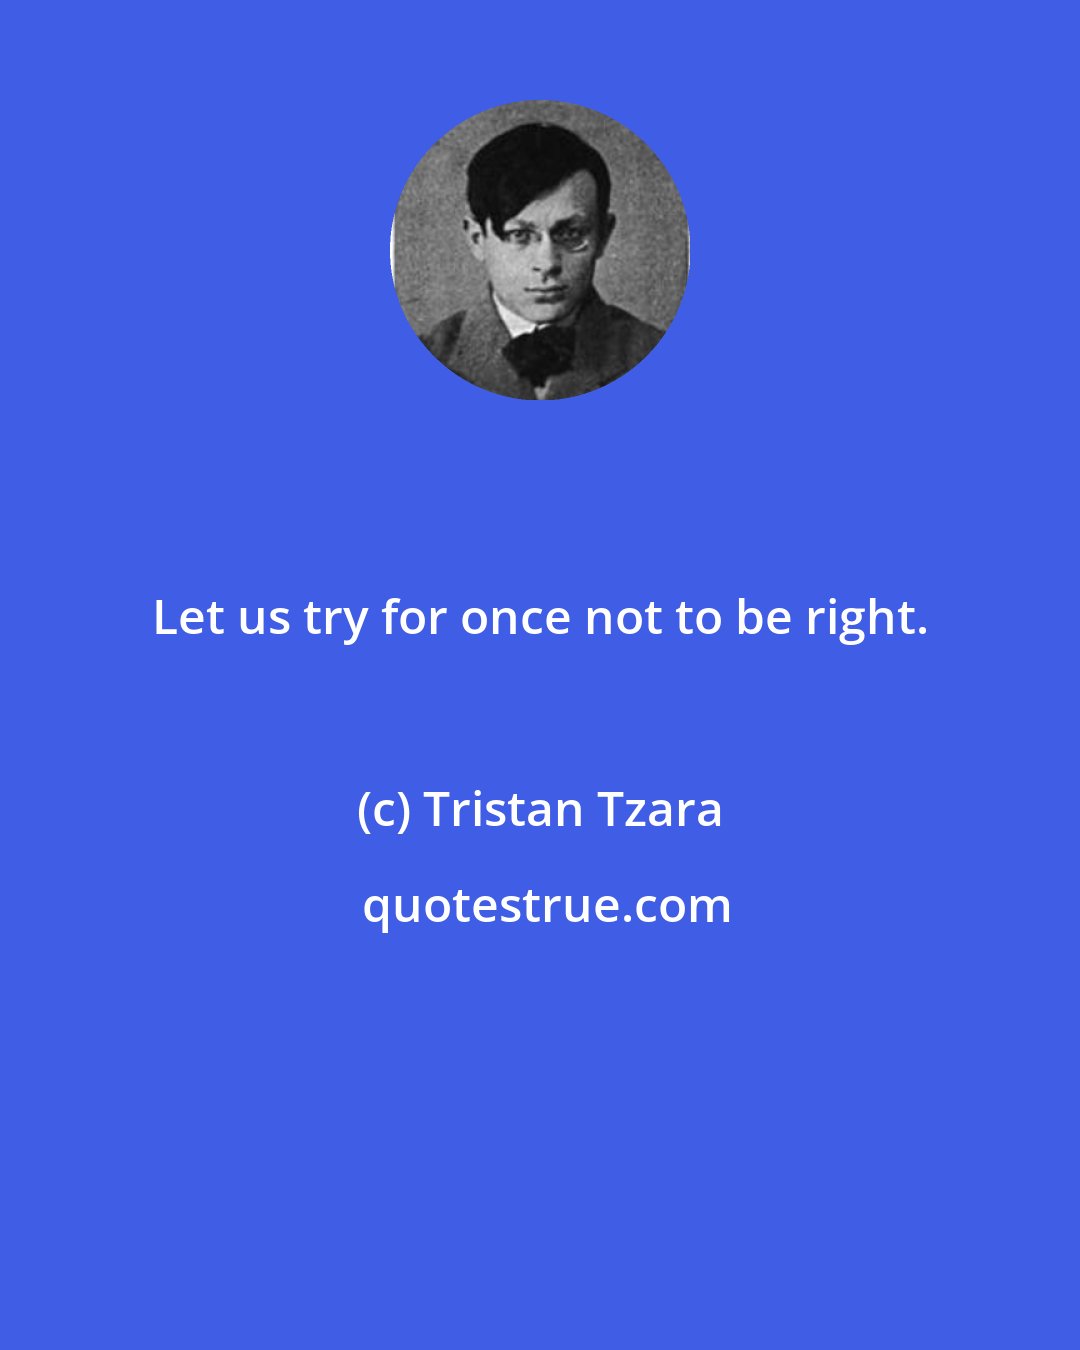 Tristan Tzara: Let us try for once not to be right.